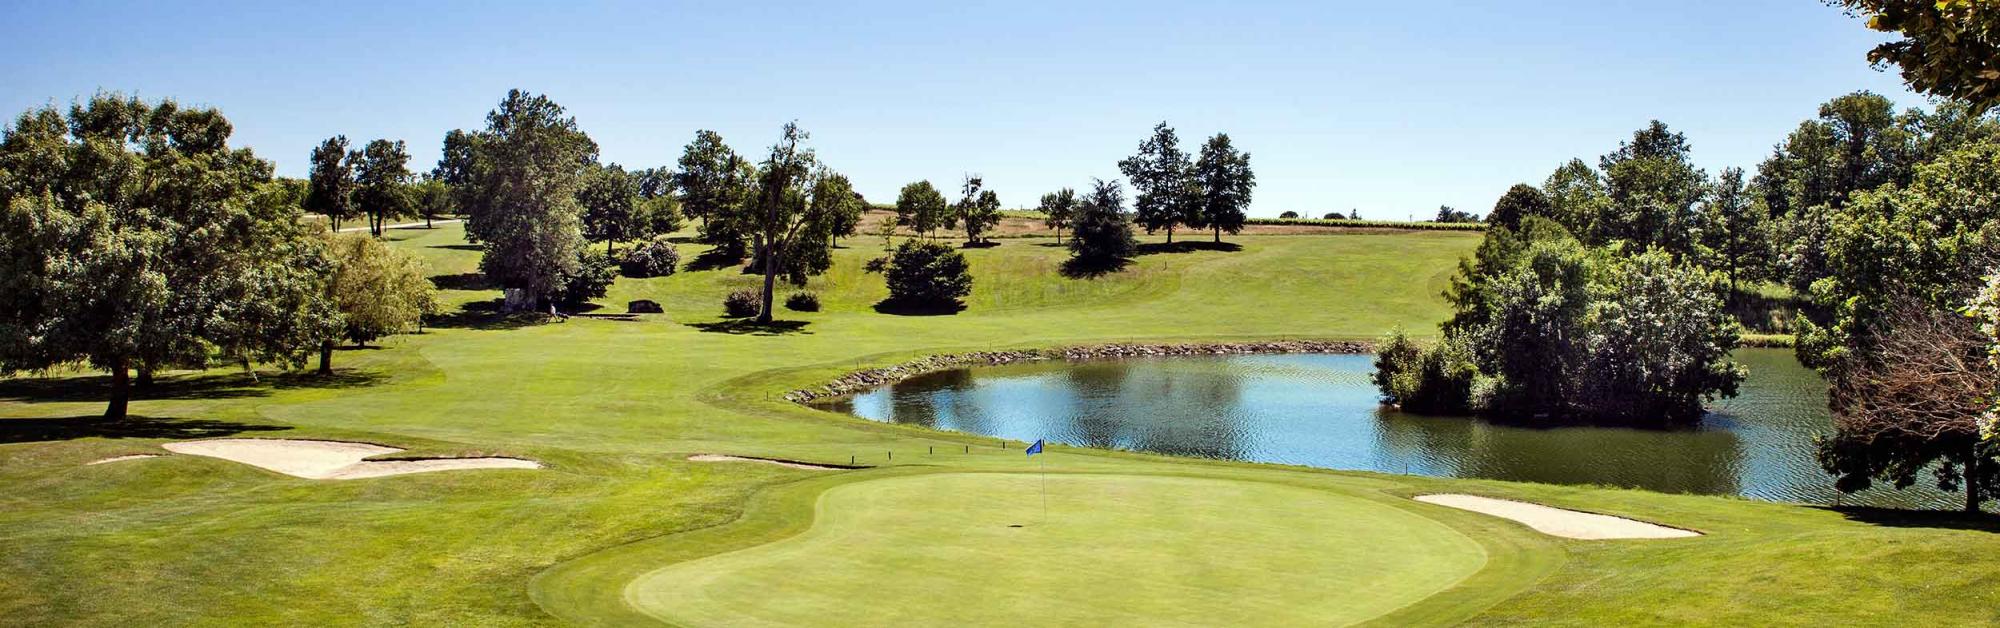 The Golf des Vigiers's picturesque golf course situated in sensational South-West France.